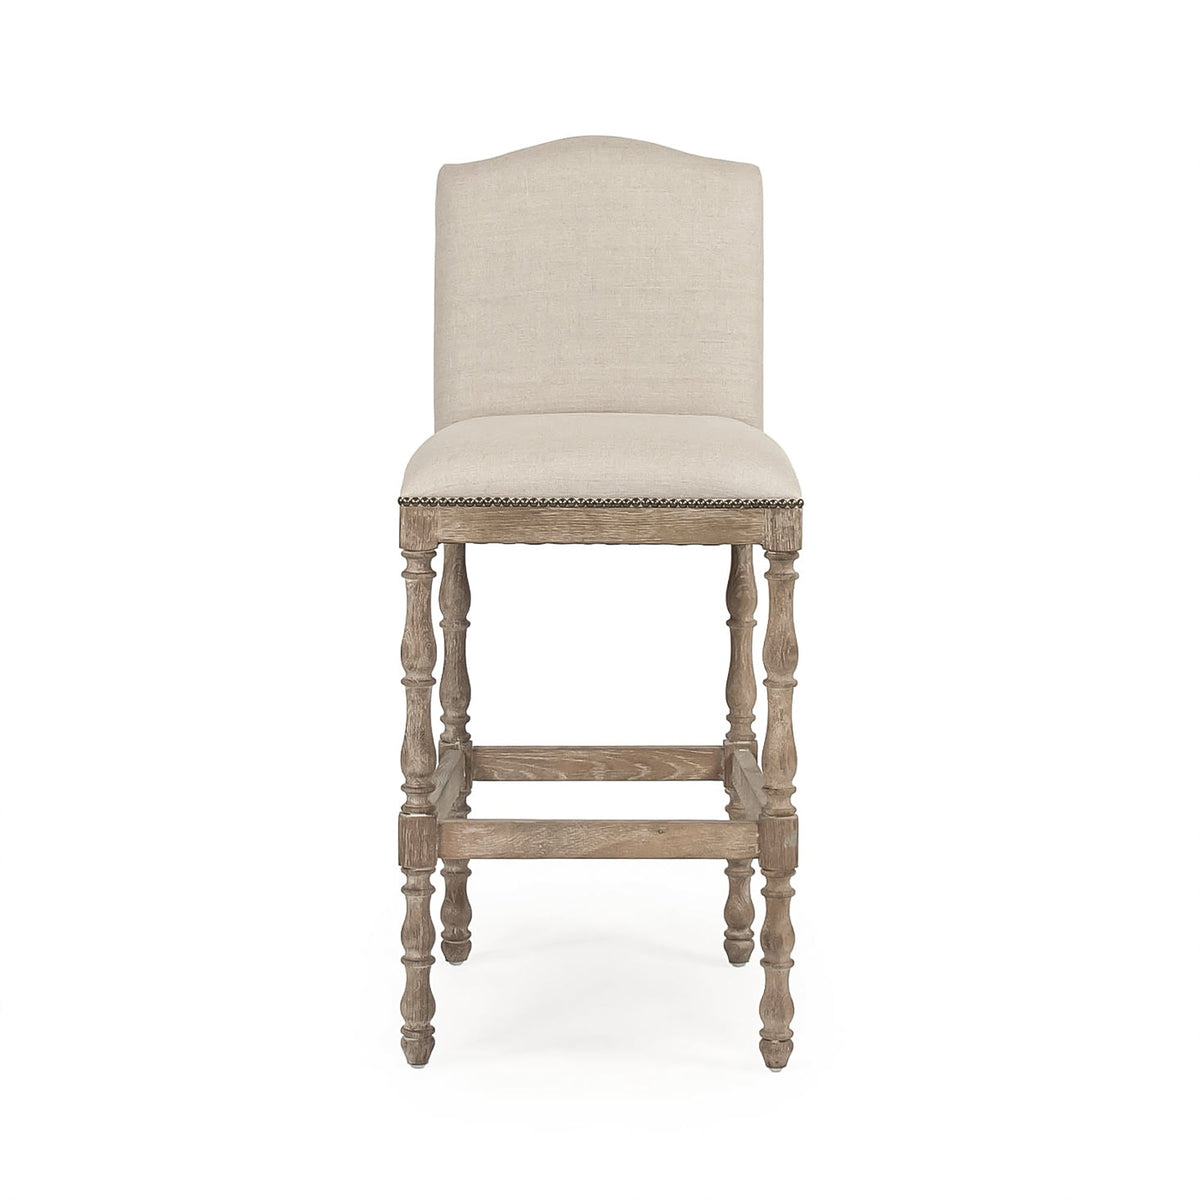 Aria Bar Stool by Zentique